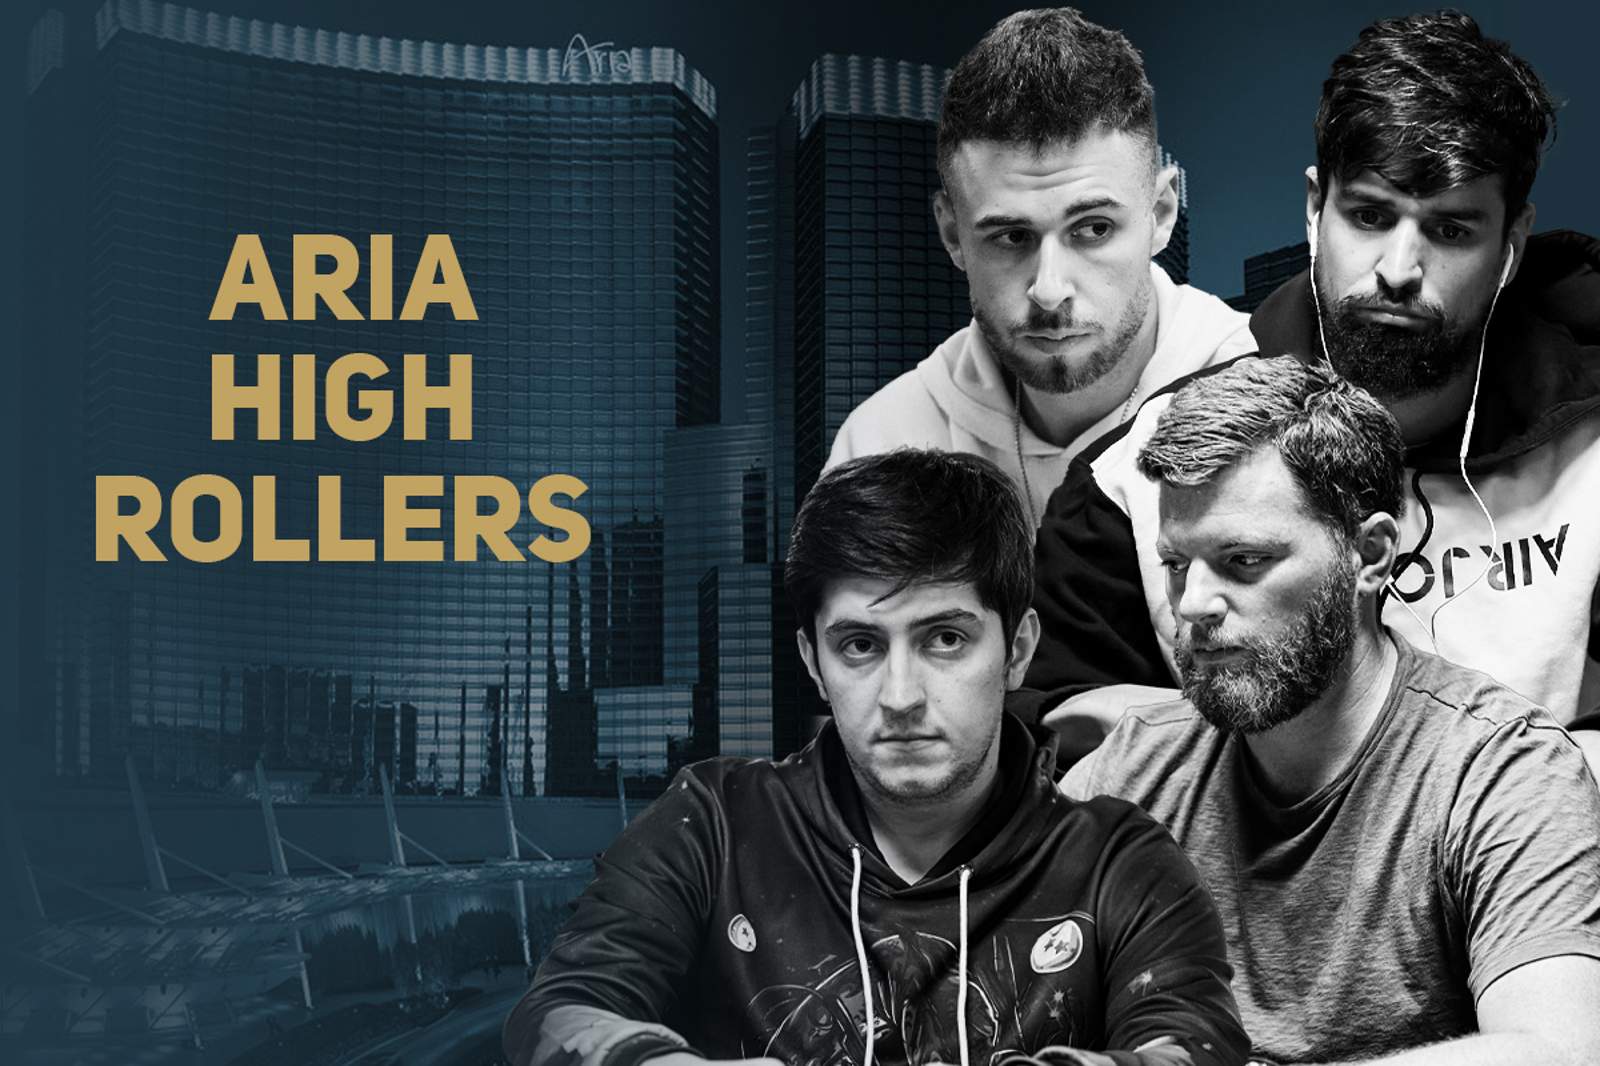 Ali Imsirovic Tops ARIA High Rollers Leaderboard with 7 Wins and $2.6 Million in Winnings